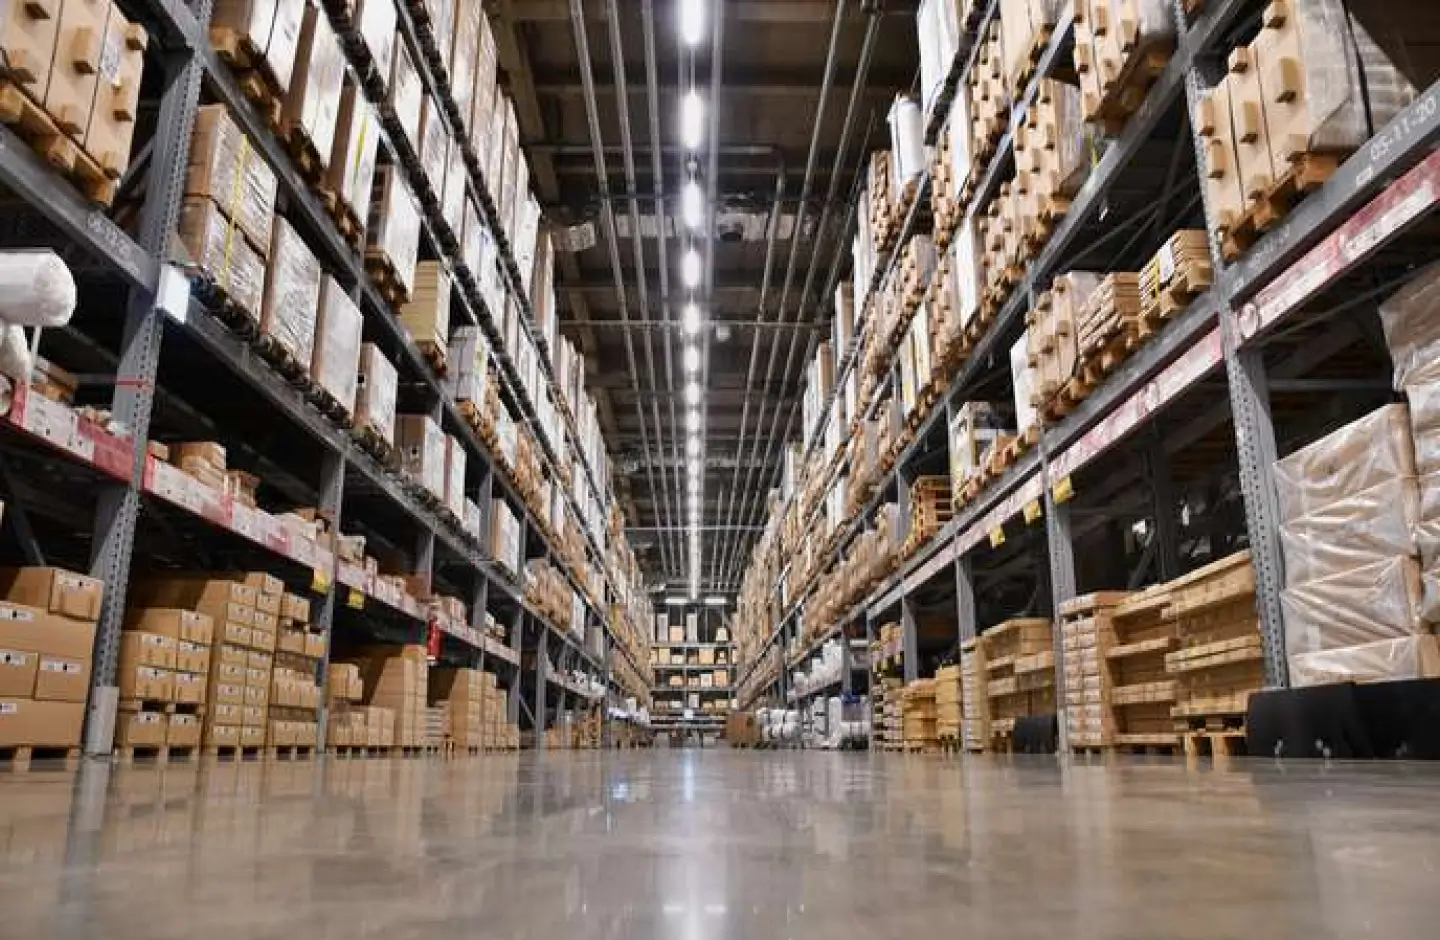 An image of an optimized warehouse storage.